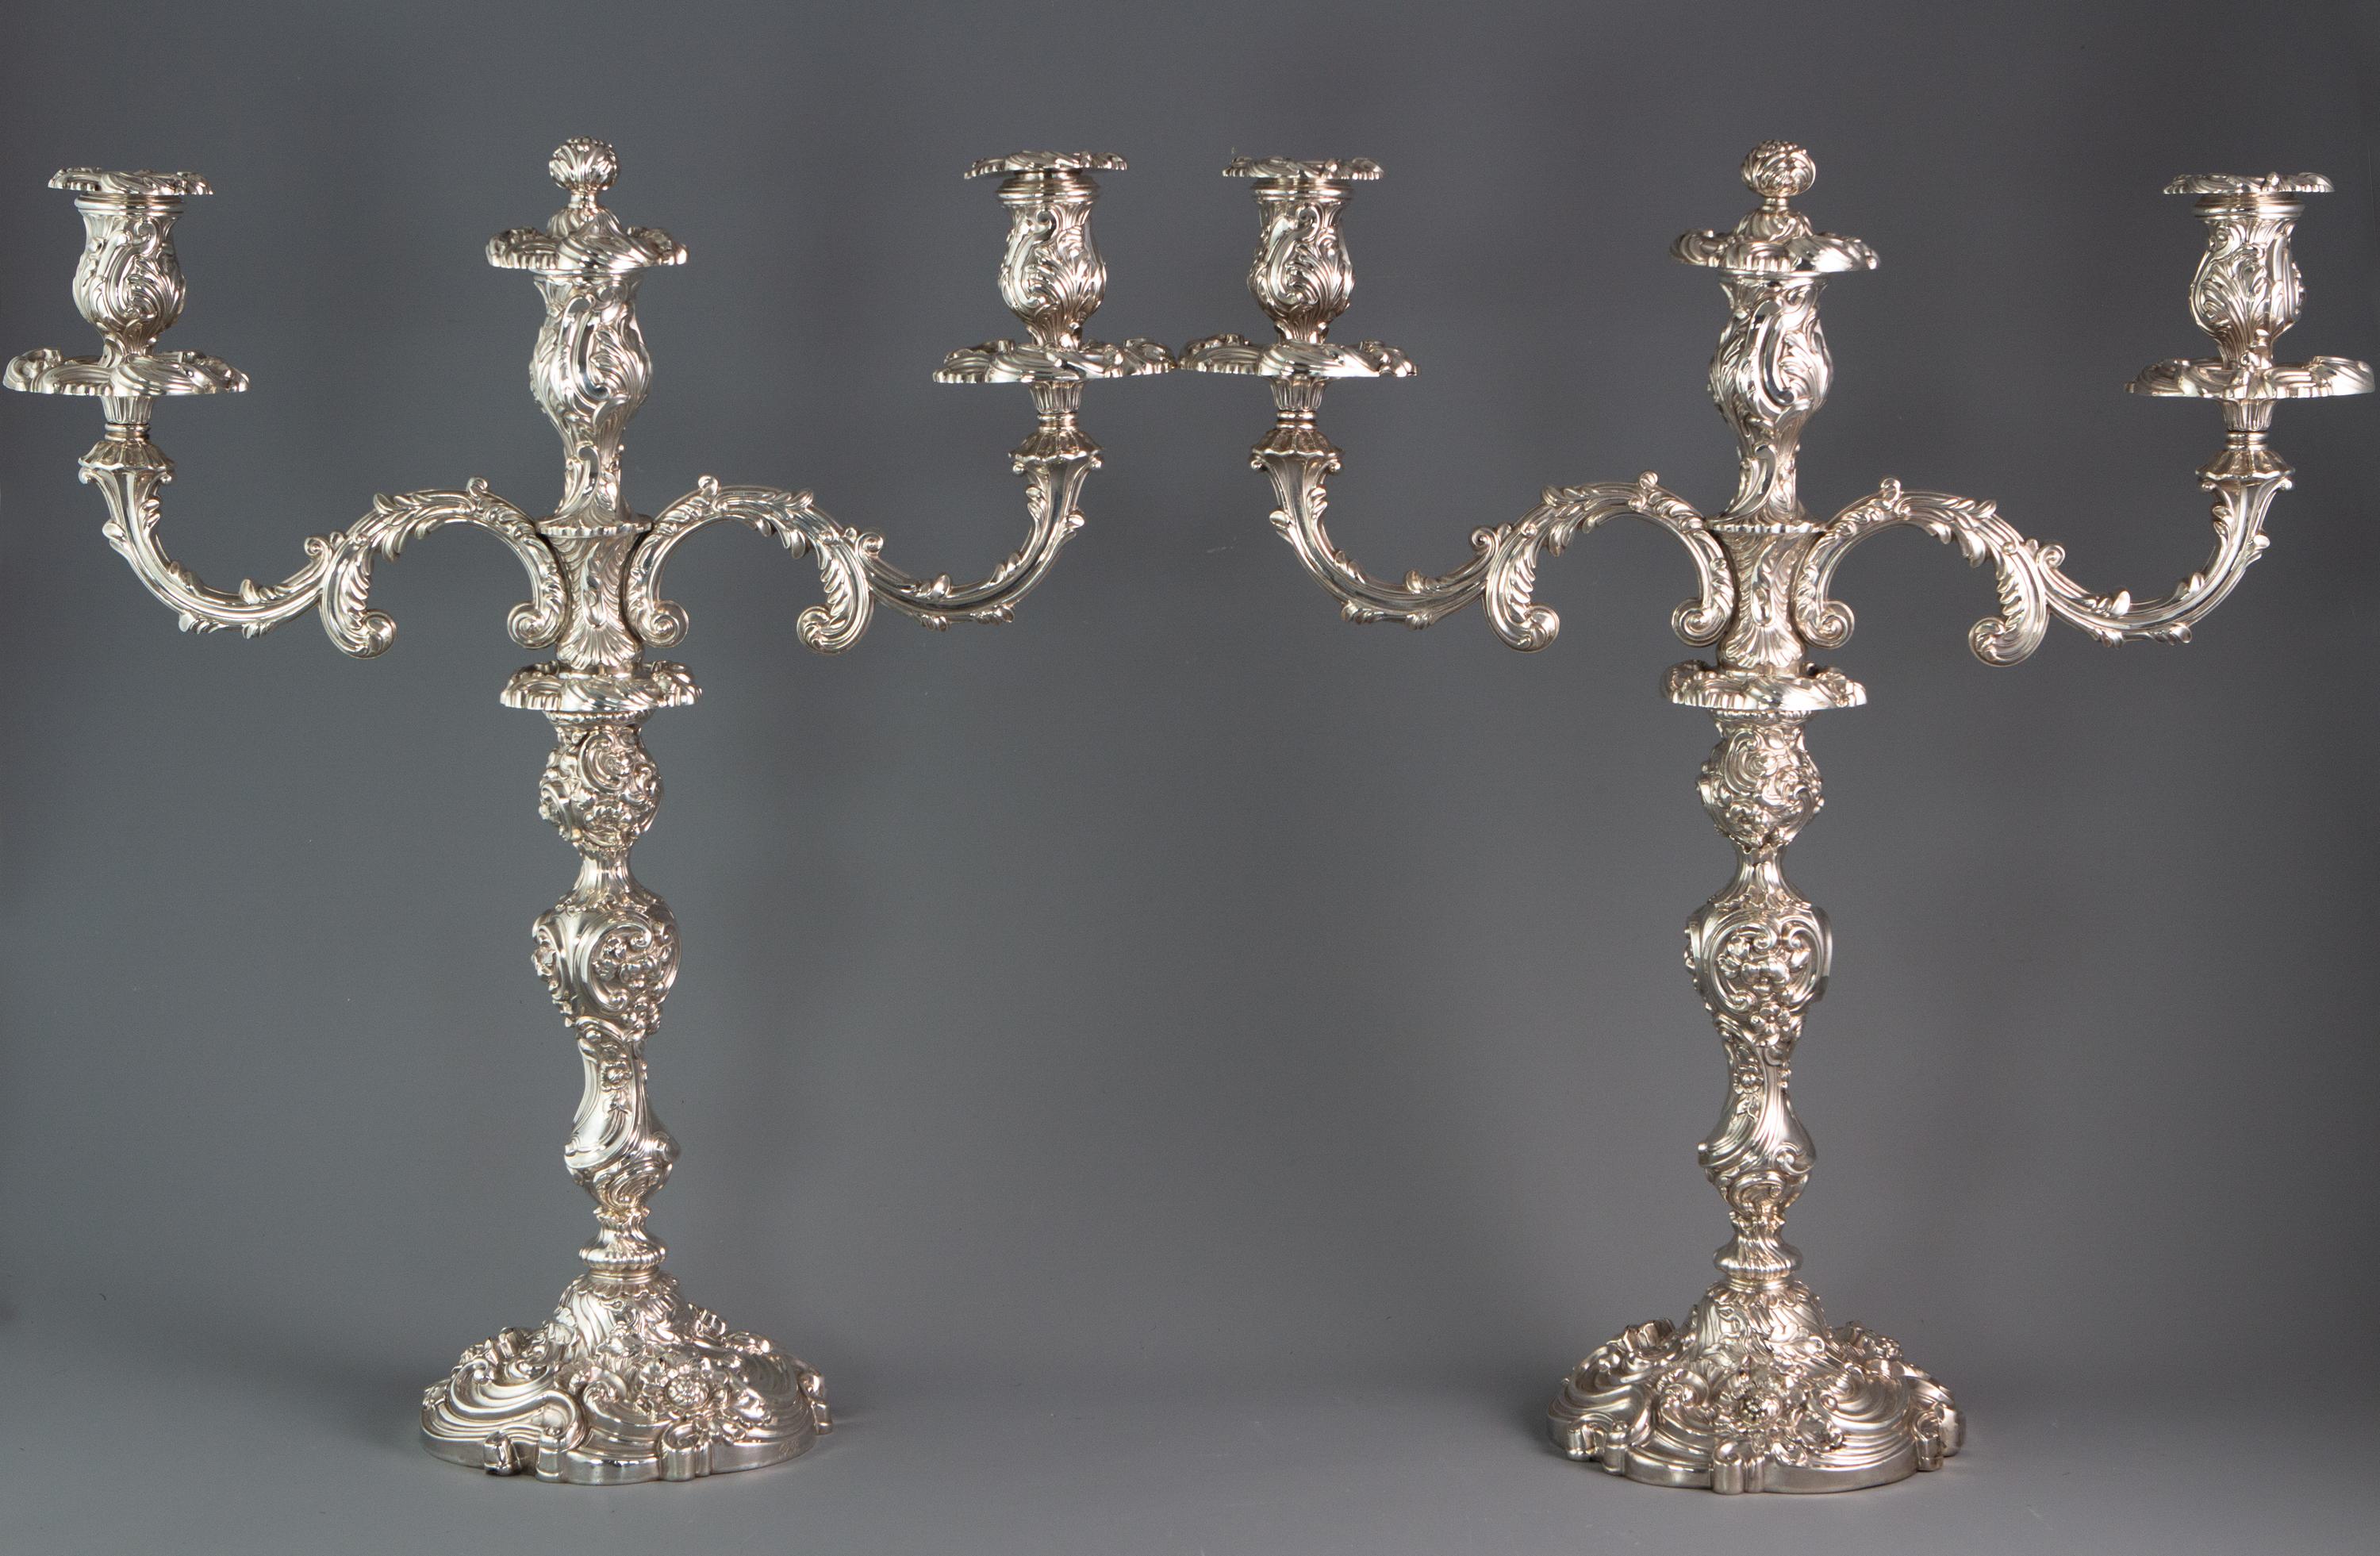 A superb table suite featuring a pair of 3-light candelabra with an accompanying pair of smaller candlesticks. All decorated in the Rococo manner with scrolling foliage, shells and roses, surmounted with a thistle decorated central snuffer. The